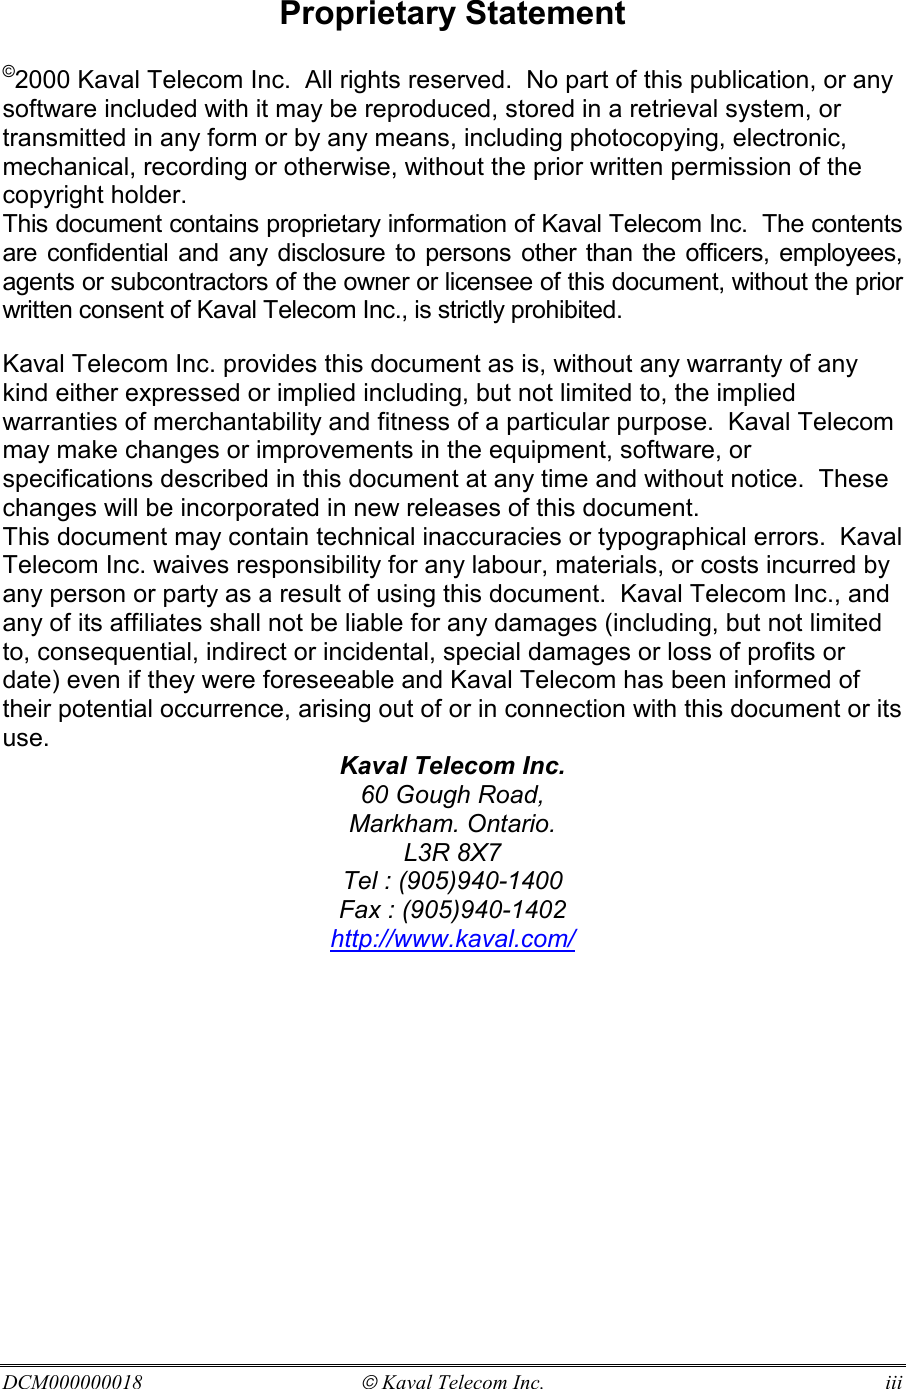 DCM000000018  Kaval Telecom Inc.  iii  Proprietary Statement  ©2000 Kaval Telecom Inc.  All rights reserved.  No part of this publication, or any software included with it may be reproduced, stored in a retrieval system, or transmitted in any form or by any means, including photocopying, electronic, mechanical, recording or otherwise, without the prior written permission of the copyright holder. This document contains proprietary information of Kaval Telecom Inc.  The contents are confidential and any disclosure to persons other than the officers, employees, agents or subcontractors of the owner or licensee of this document, without the prior written consent of Kaval Telecom Inc., is strictly prohibited. Kaval Telecom Inc. provides this document as is, without any warranty of any kind either expressed or implied including, but not limited to, the implied warranties of merchantability and fitness of a particular purpose.  Kaval Telecom may make changes or improvements in the equipment, software, or specifications described in this document at any time and without notice.  These changes will be incorporated in new releases of this document. This document may contain technical inaccuracies or typographical errors.  Kaval Telecom Inc. waives responsibility for any labour, materials, or costs incurred by any person or party as a result of using this document.  Kaval Telecom Inc., and any of its affiliates shall not be liable for any damages (including, but not limited to, consequential, indirect or incidental, special damages or loss of profits or date) even if they were foreseeable and Kaval Telecom has been informed of their potential occurrence, arising out of or in connection with this document or its use. Kaval Telecom Inc. 60 Gough Road, Markham. Ontario. L3R 8X7 Tel : (905)940-1400 Fax : (905)940-1402 http://www.kaval.com/  